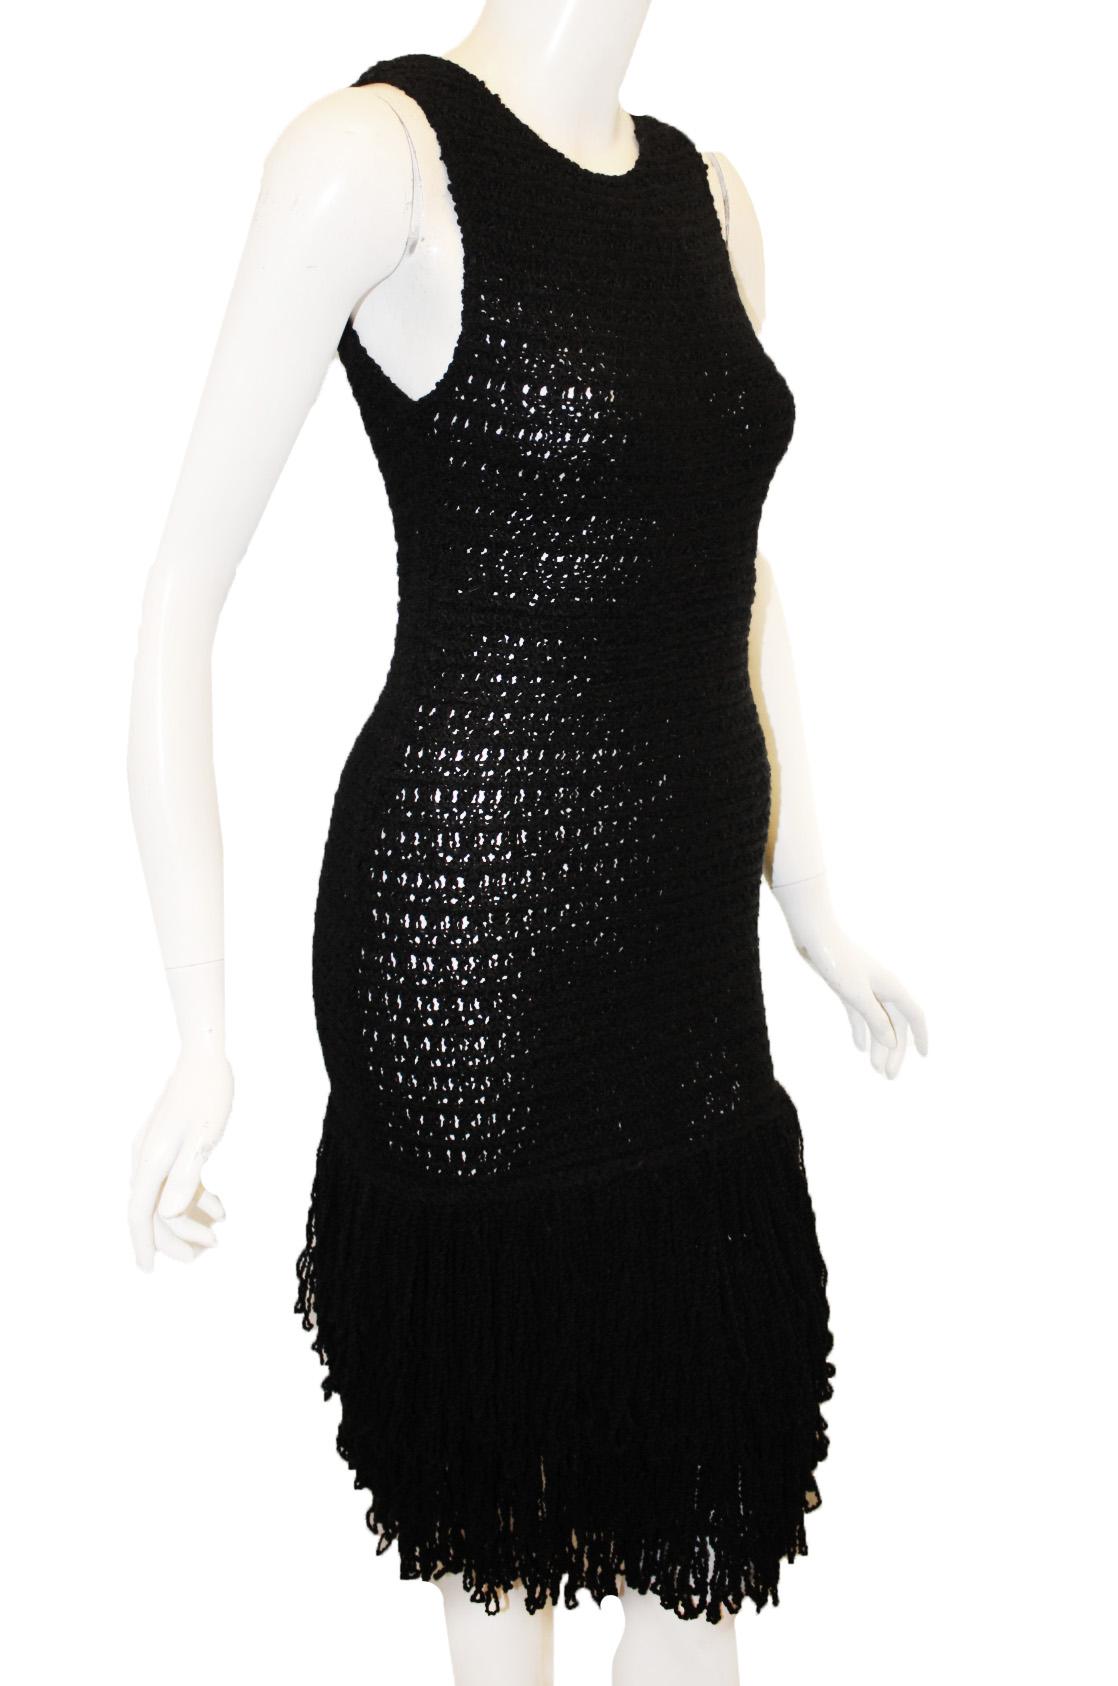 Christian Dior black alpaca wool sleeveless crochet runway dress with round neckline and overlapped wool yarn looped to form fringe all around the hem.  This dress in unlined giving this dress a see through appearance, but, you can always wear a